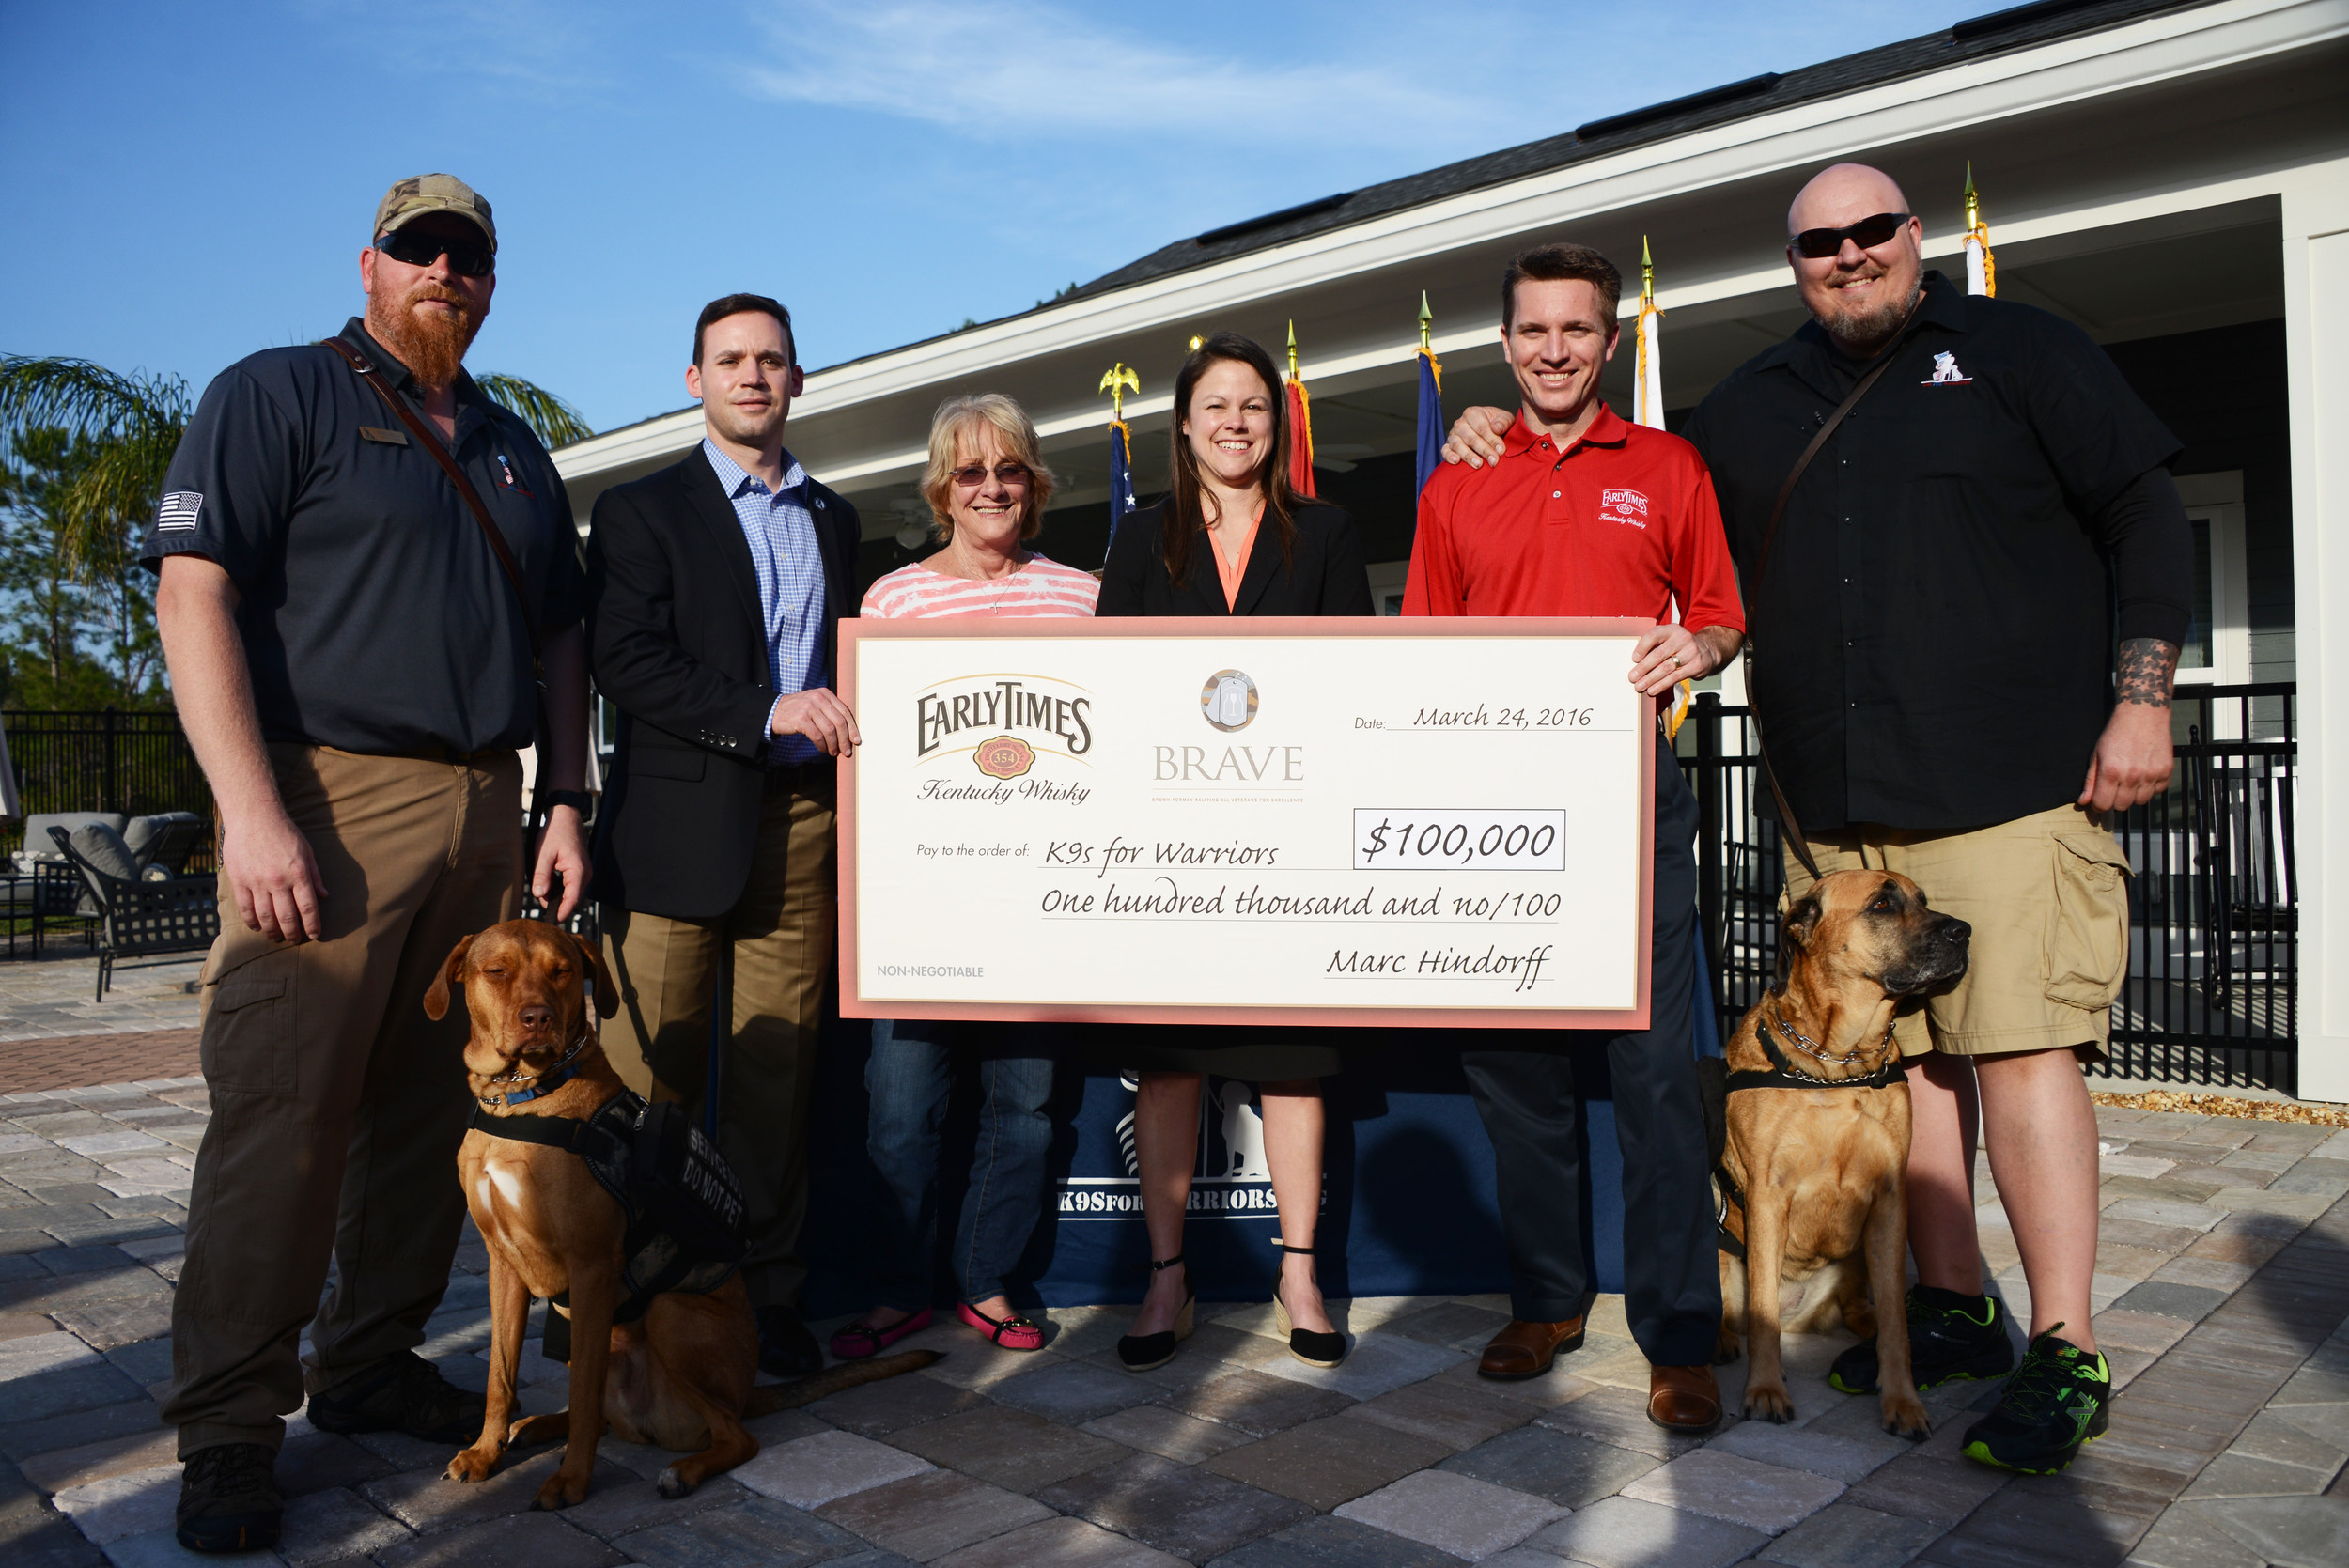 K9s for Warriors Founder Shari Duval and Executive Director Rory Diamond accept a $100,000 donation from Early Times Kentucky Whisky. From left:  K9s for Warriors graduate Greg Wells and his service dog, Utah; Diamond; Duval; Robin Nicholson of Early Times parent company Brown-Forman; Early Times’ Marc Hindorff; and and K9s Graduate Joe Swoboda and his service dog Lilly.